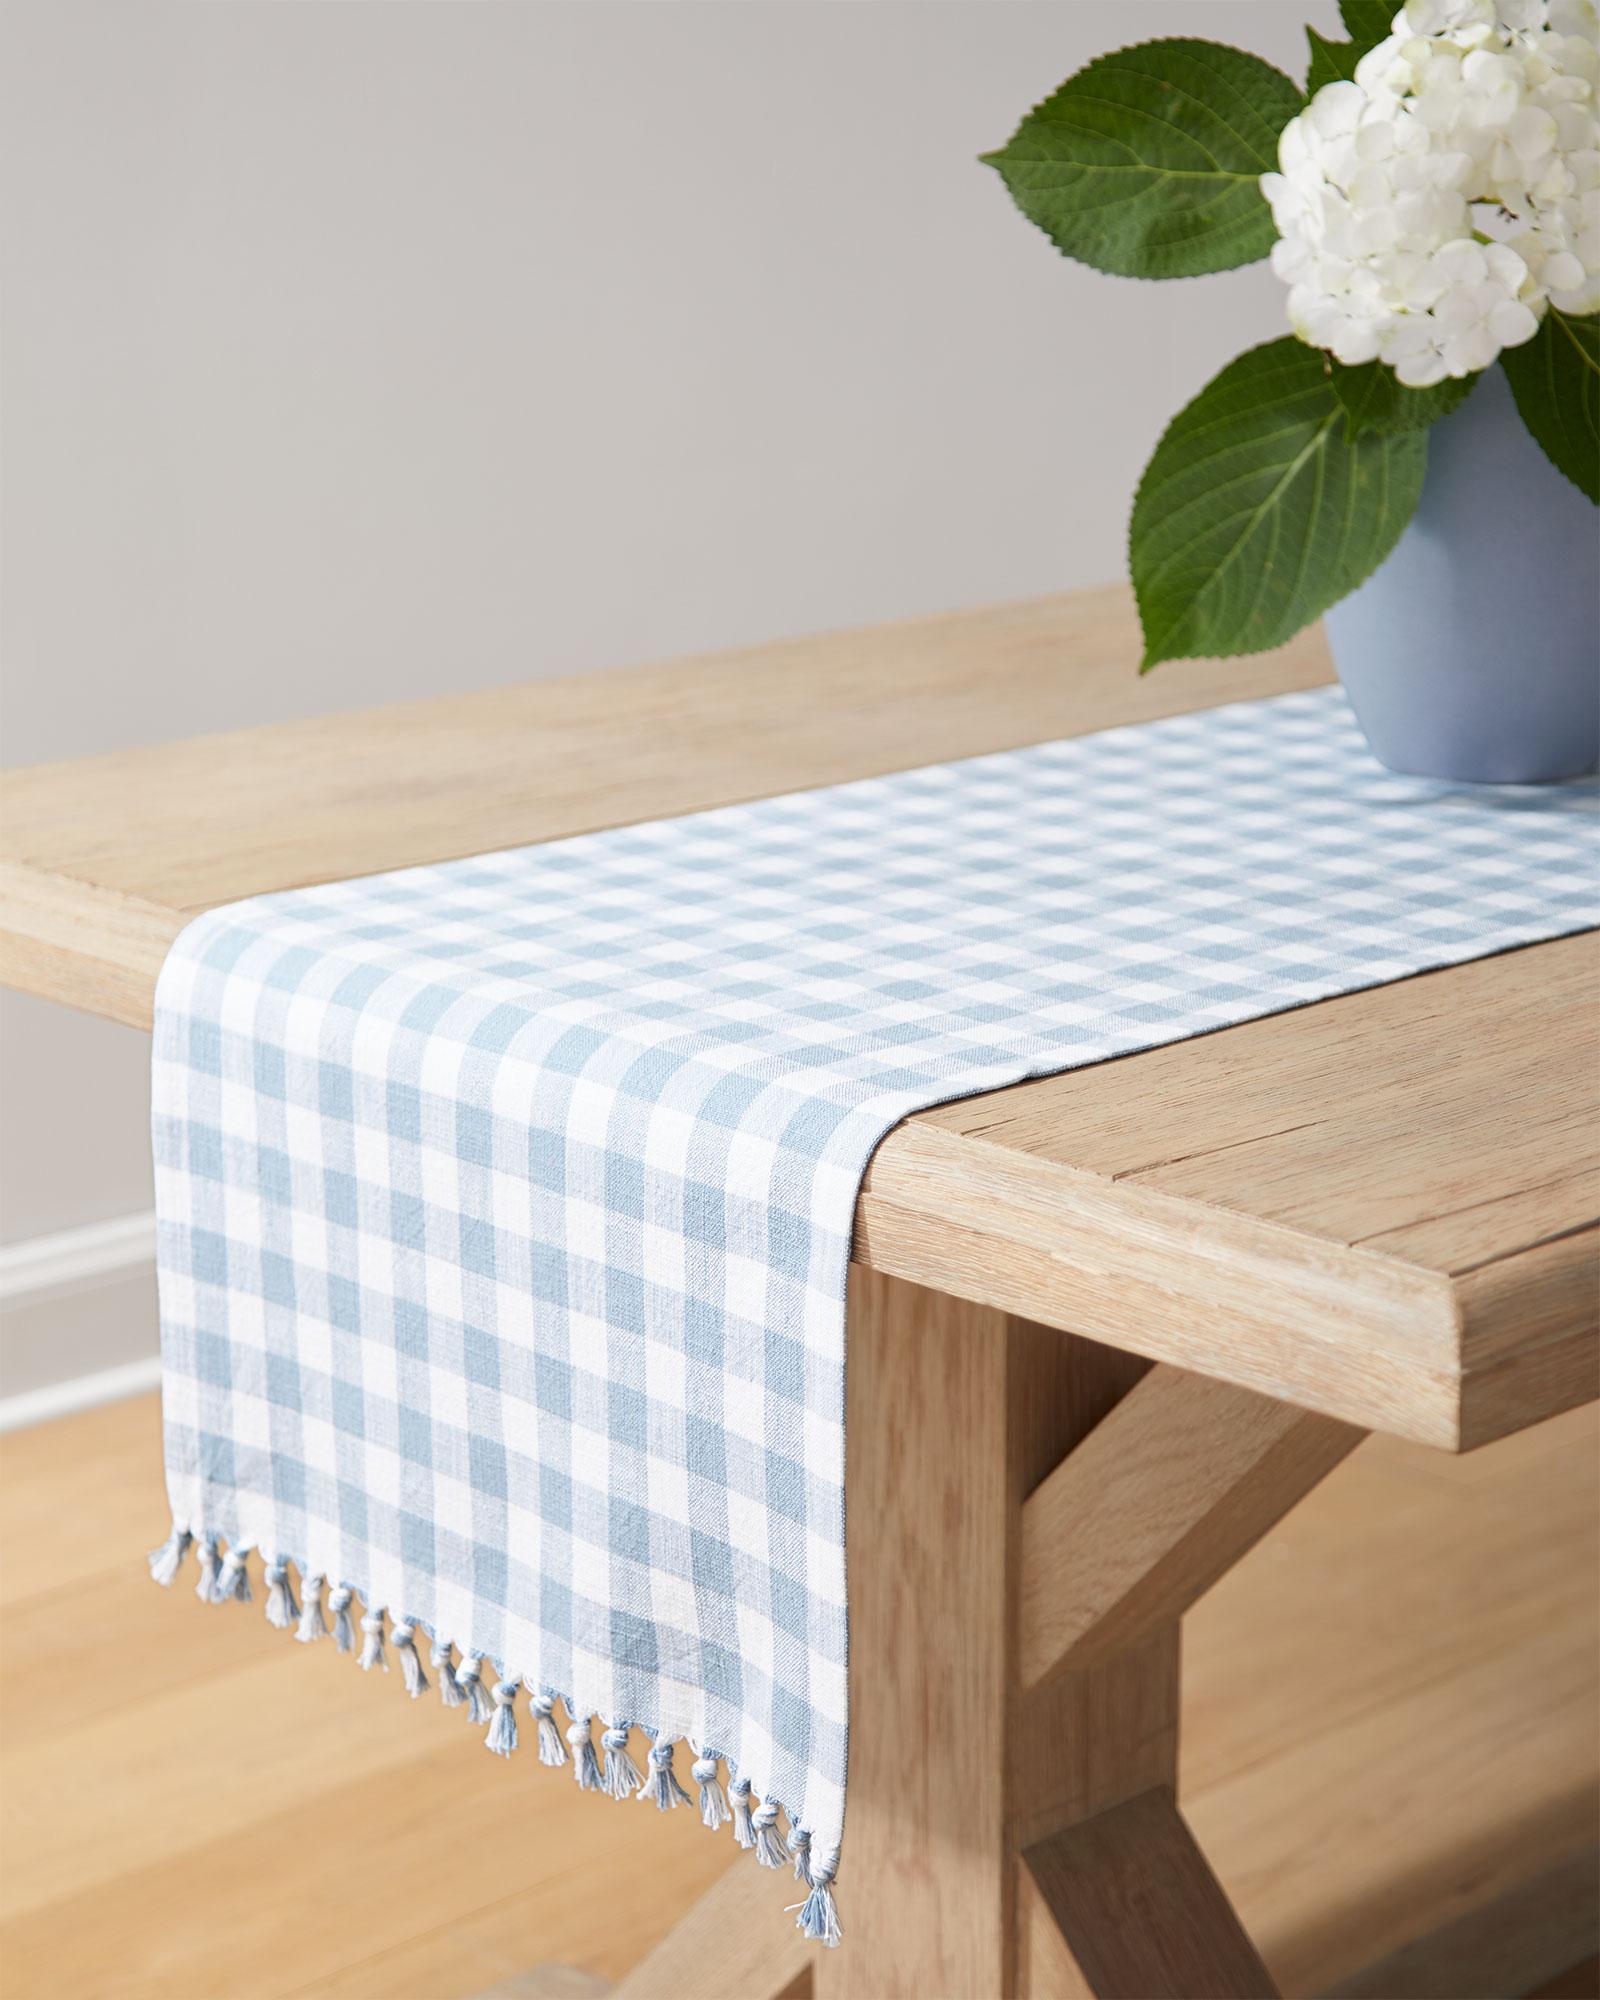 Fabric by The Yard - Classic Gingham Linen in Hydrangea Blue | Serena & Lily